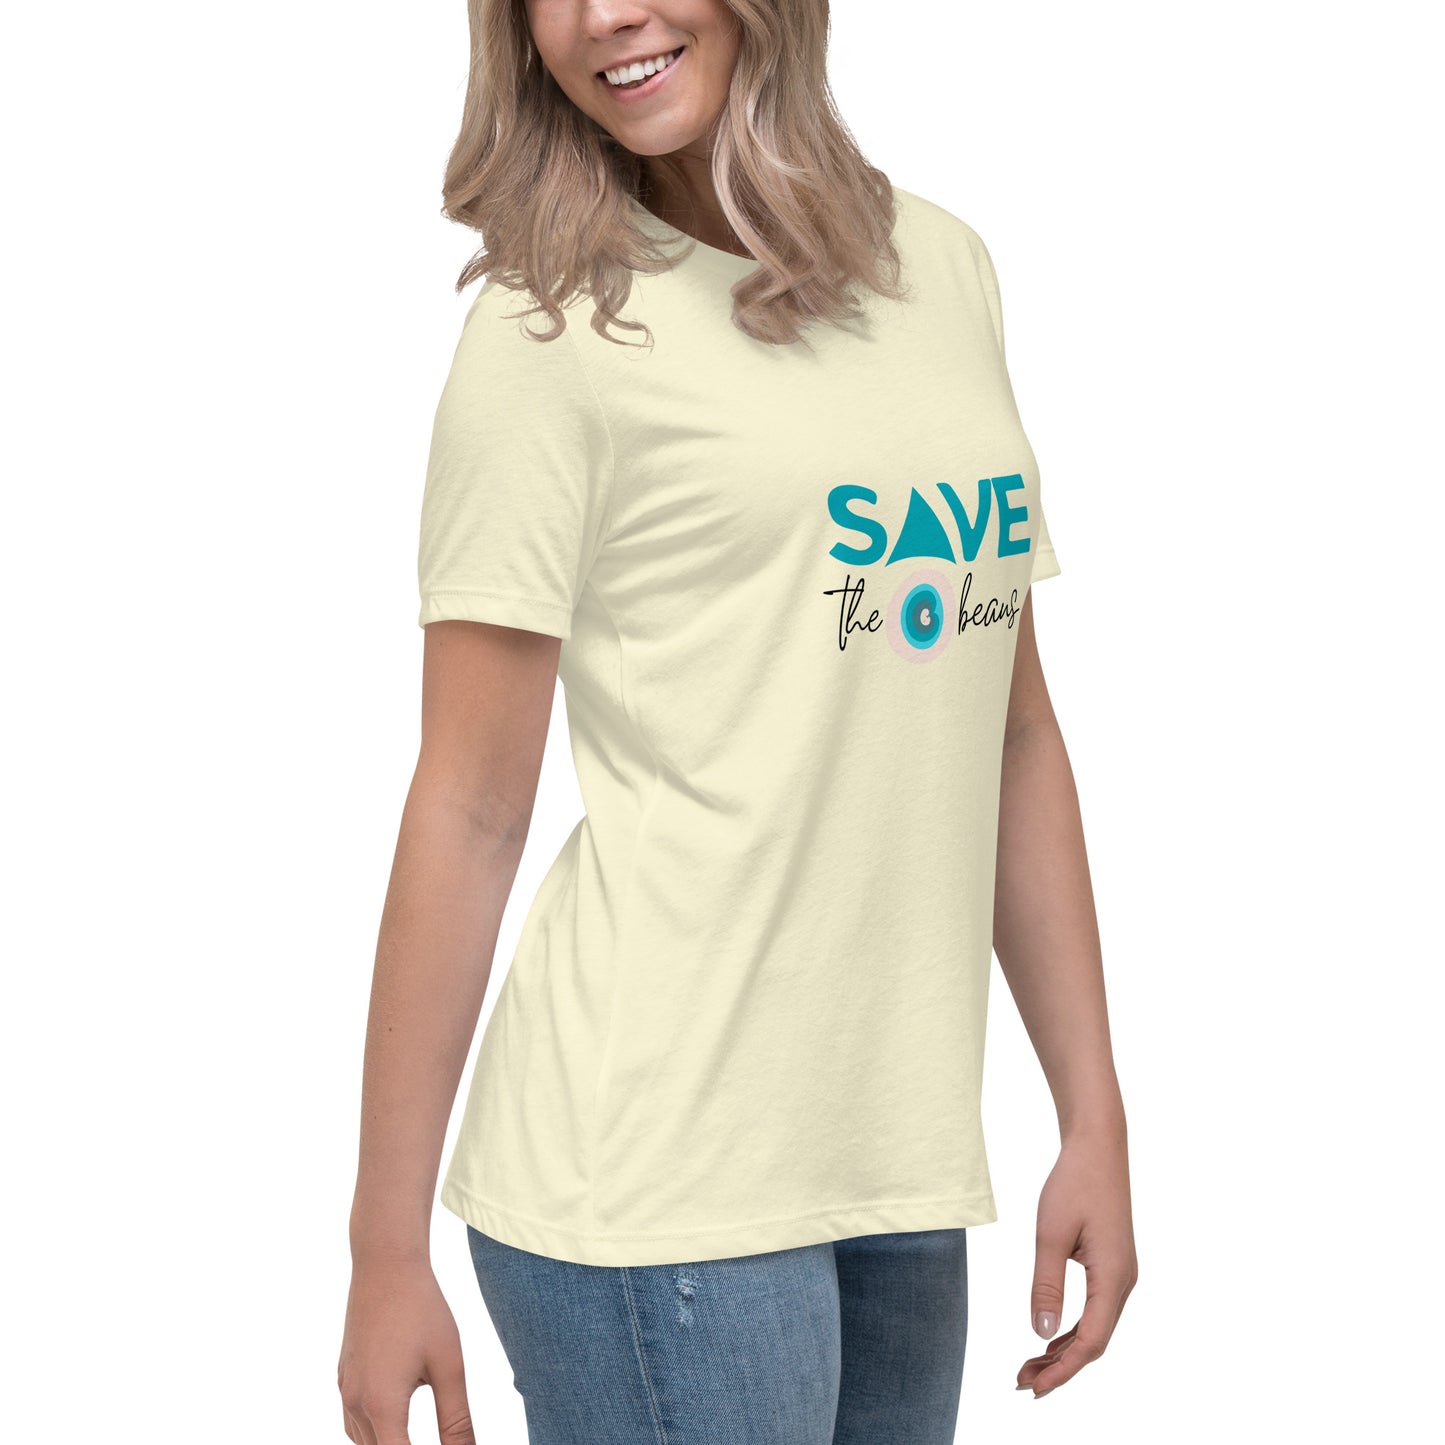 "Save the Beans" Women's Relaxed T-Shirt